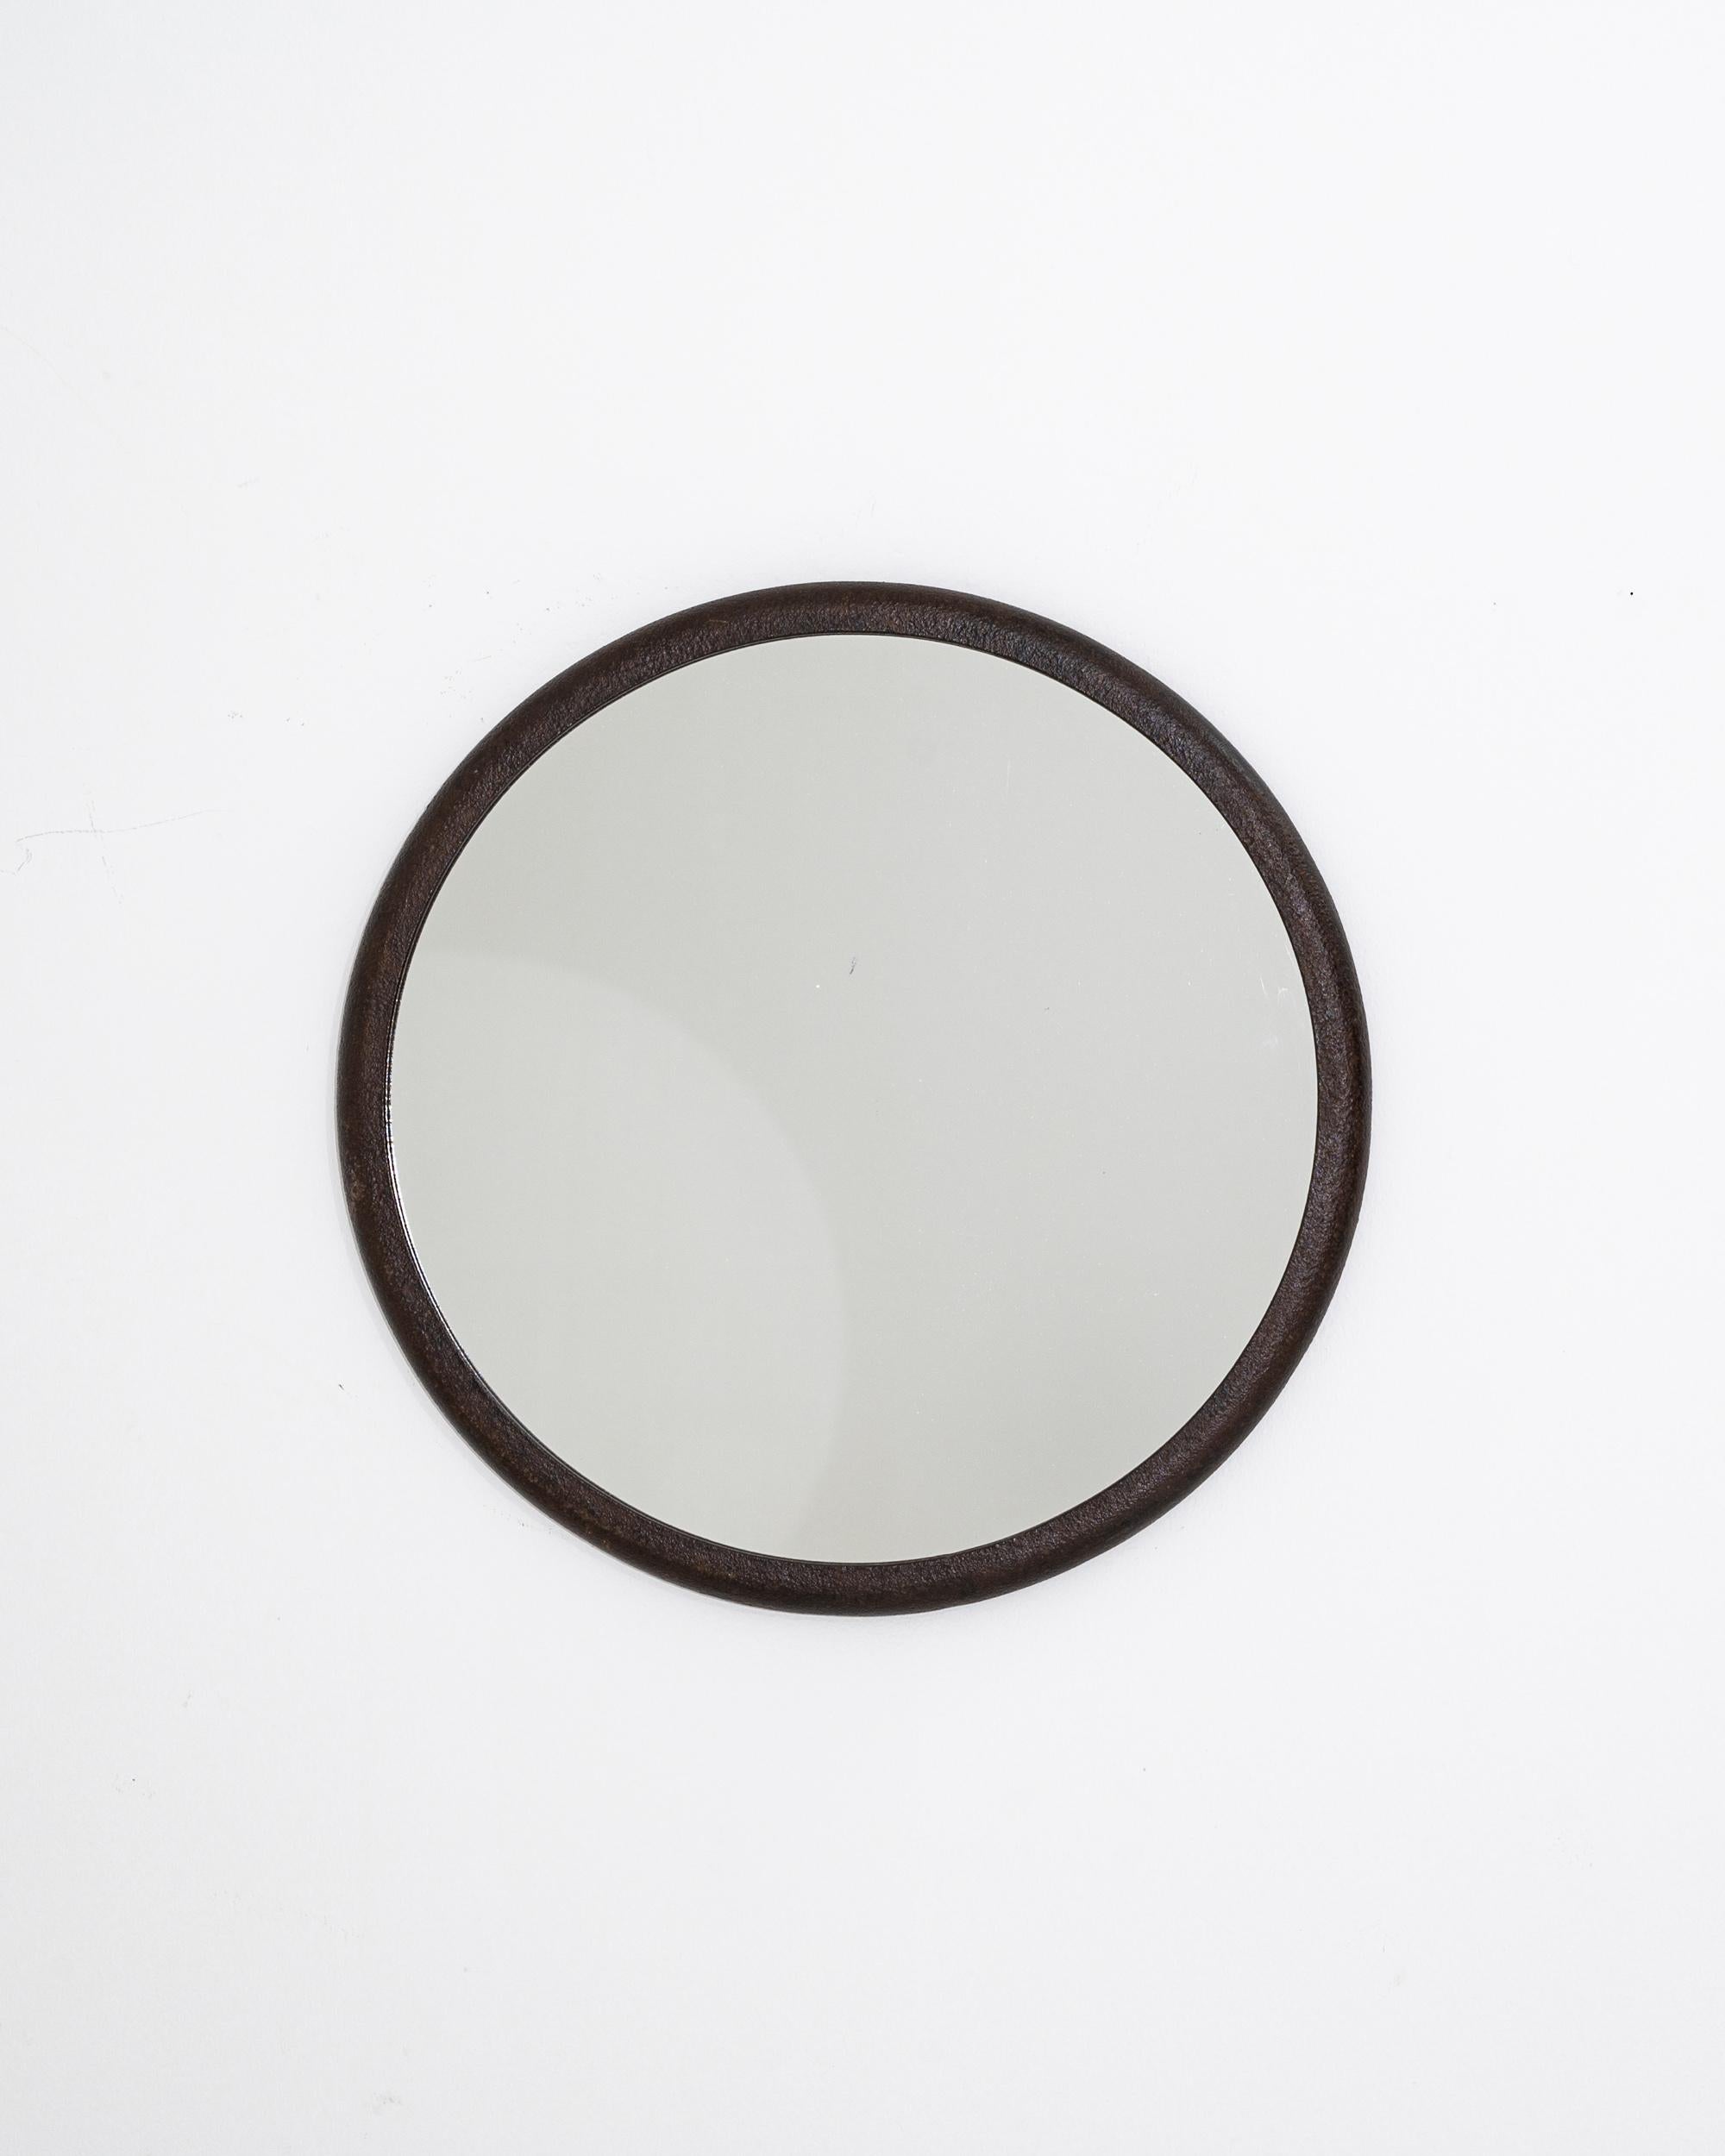 A polish iron mirror created in the 1950s. Simple yet elegant, this circular mirror offers unique Industrial charm. Its frame, a weathered and patinated metal ring adds a compelling grit to the materiality of the piece, standing in pleasing contrast